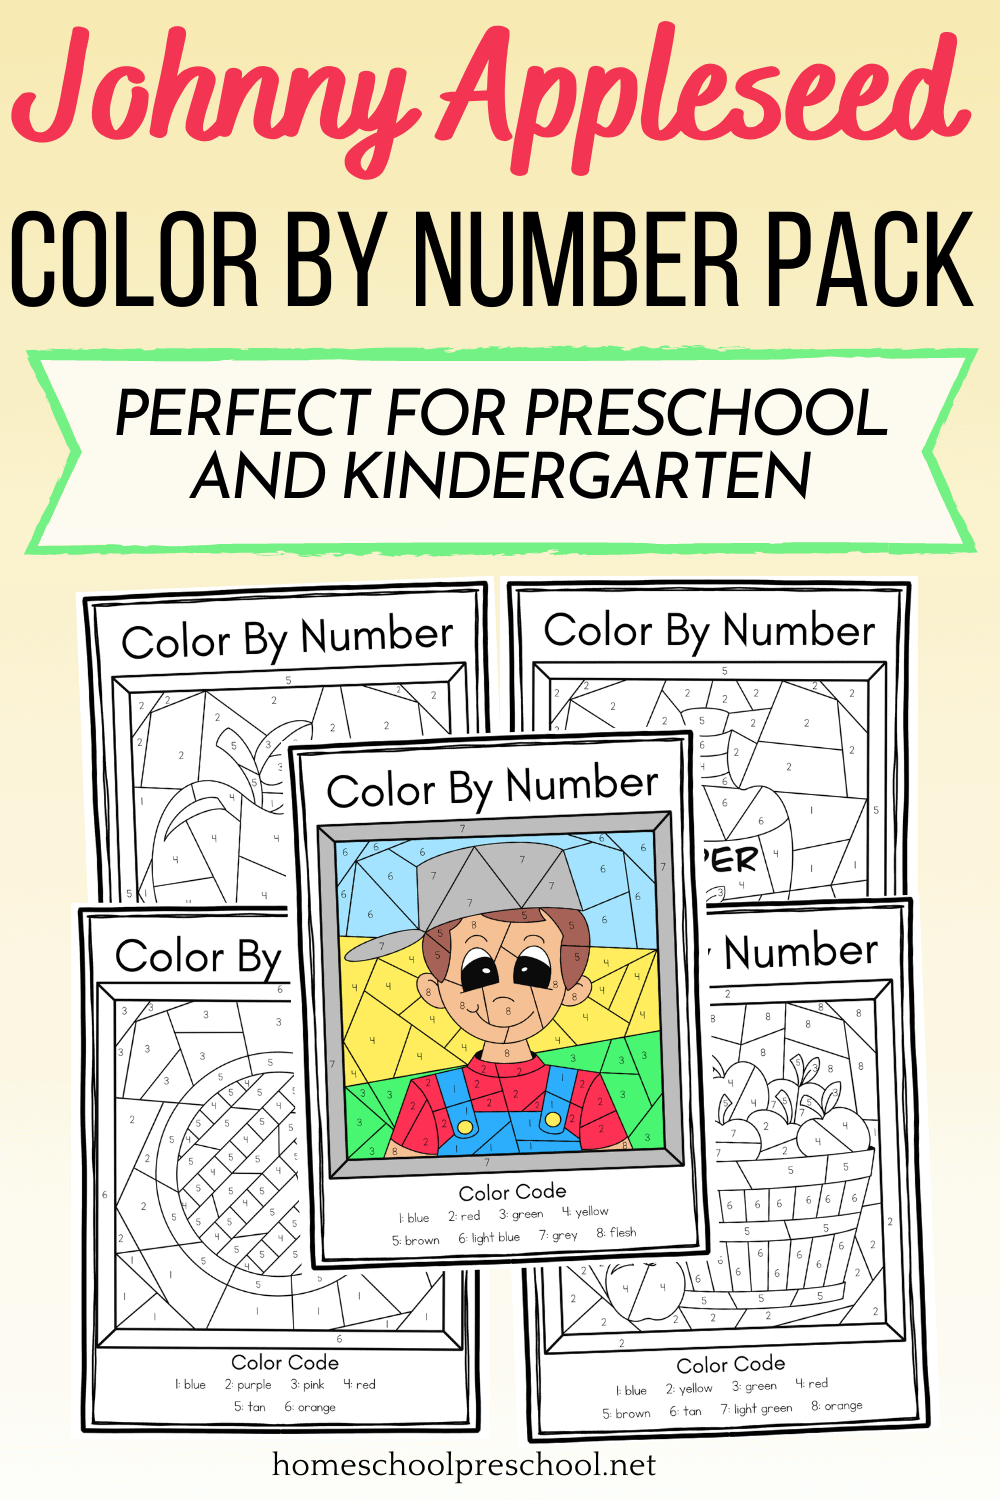 Johnny Appleseed Color by Number